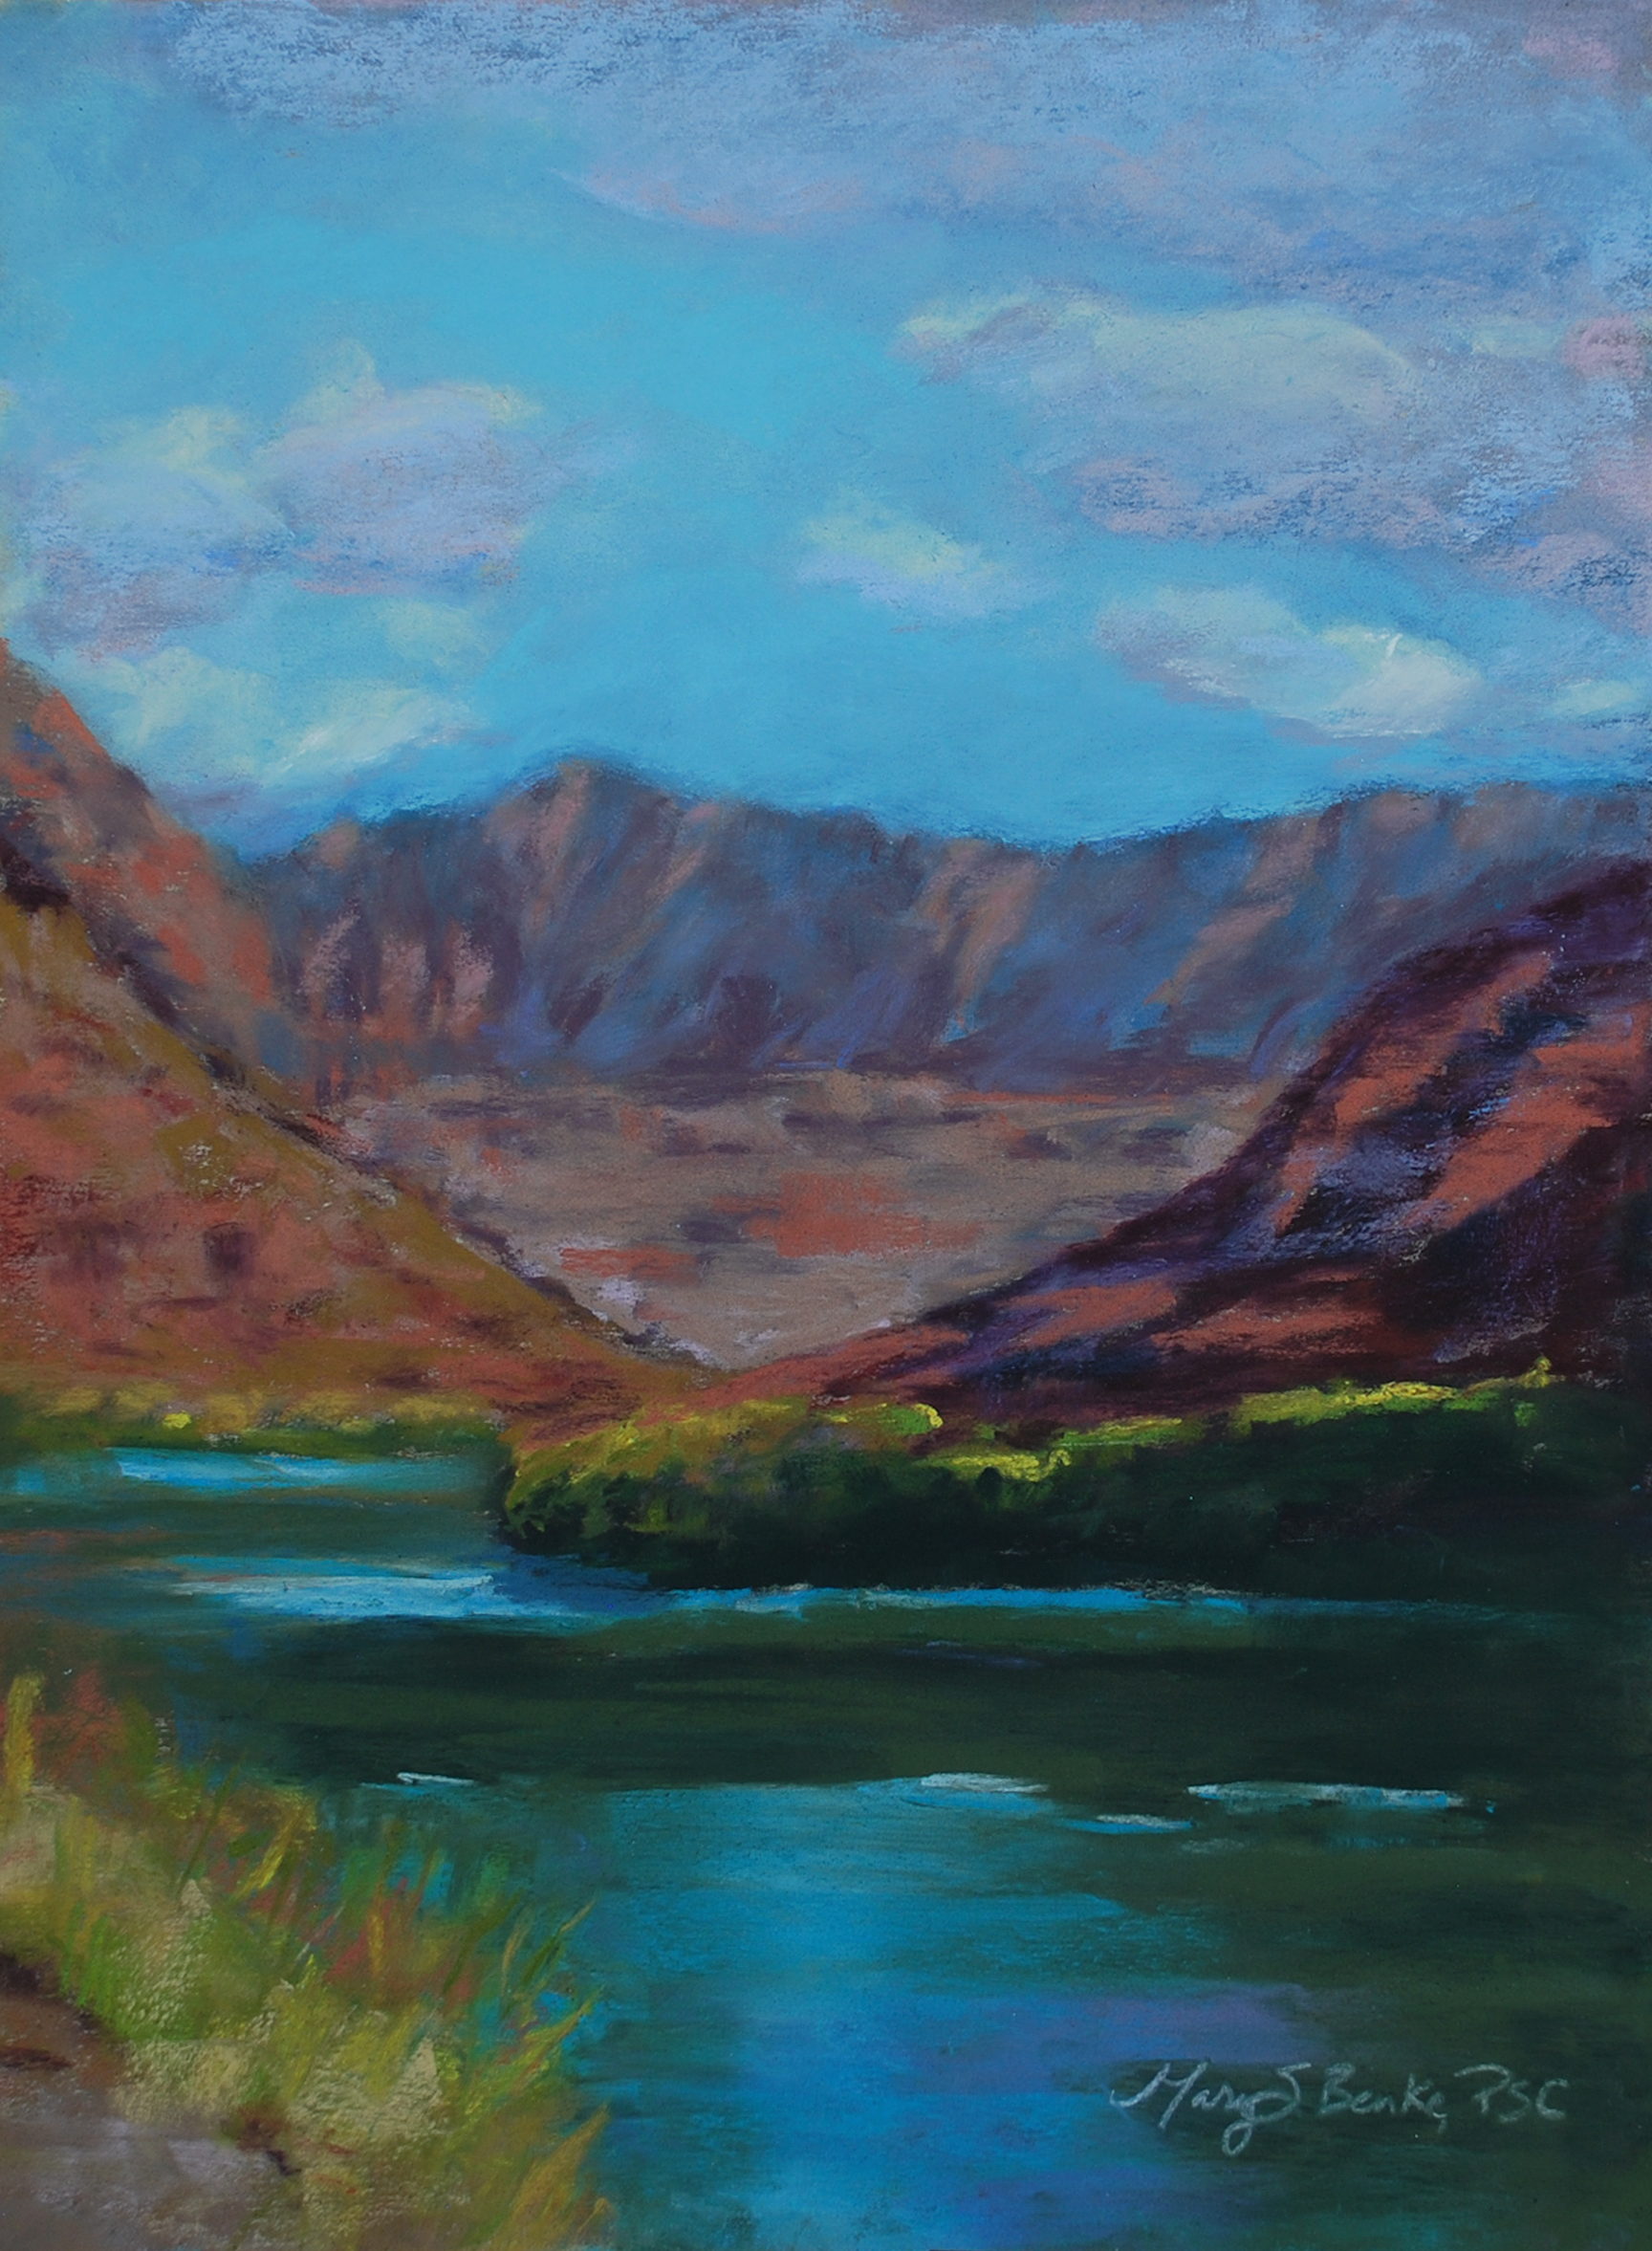 Pastel landscape painting of a scene along the Colorado River featuring water, rocks, mountains, and Fisher Towers in Utah near Moab by Mary Benke